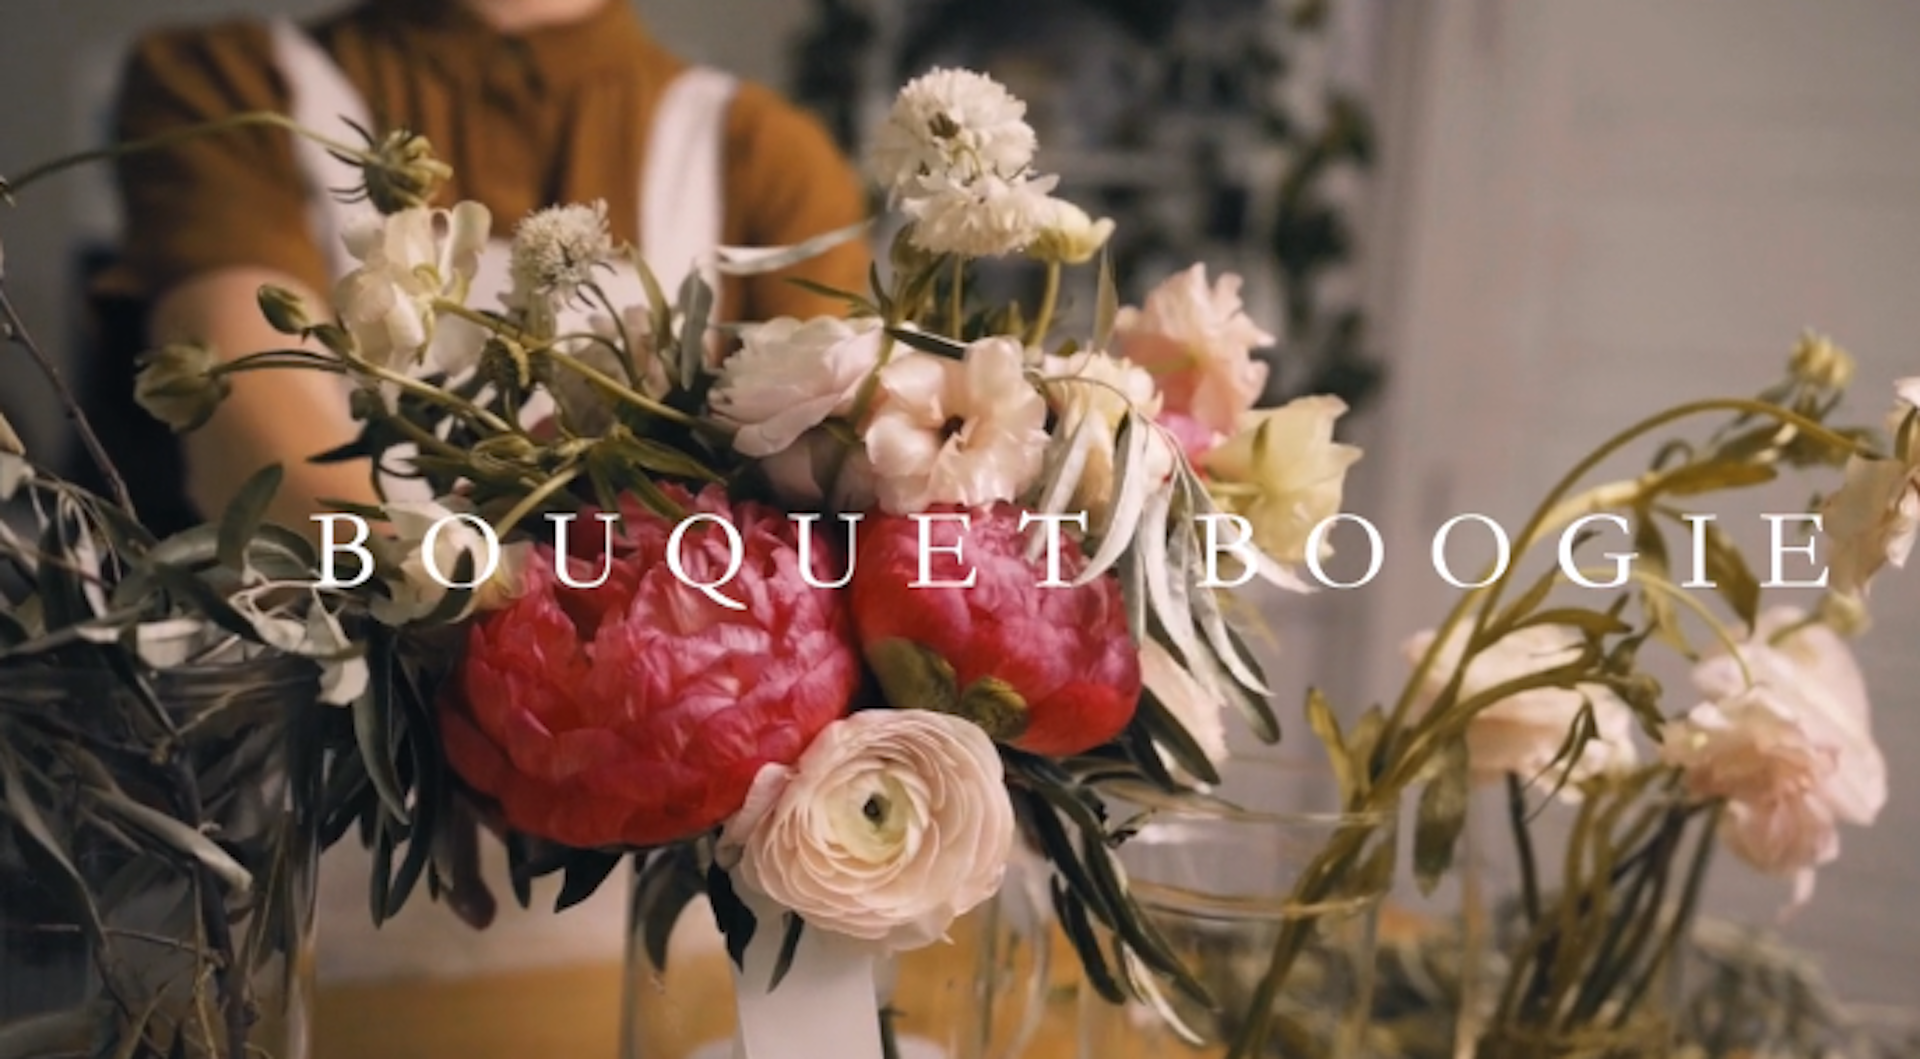 This 1 Minute Flower Shop Promo Proves The Value Of Video Vimeo Blog